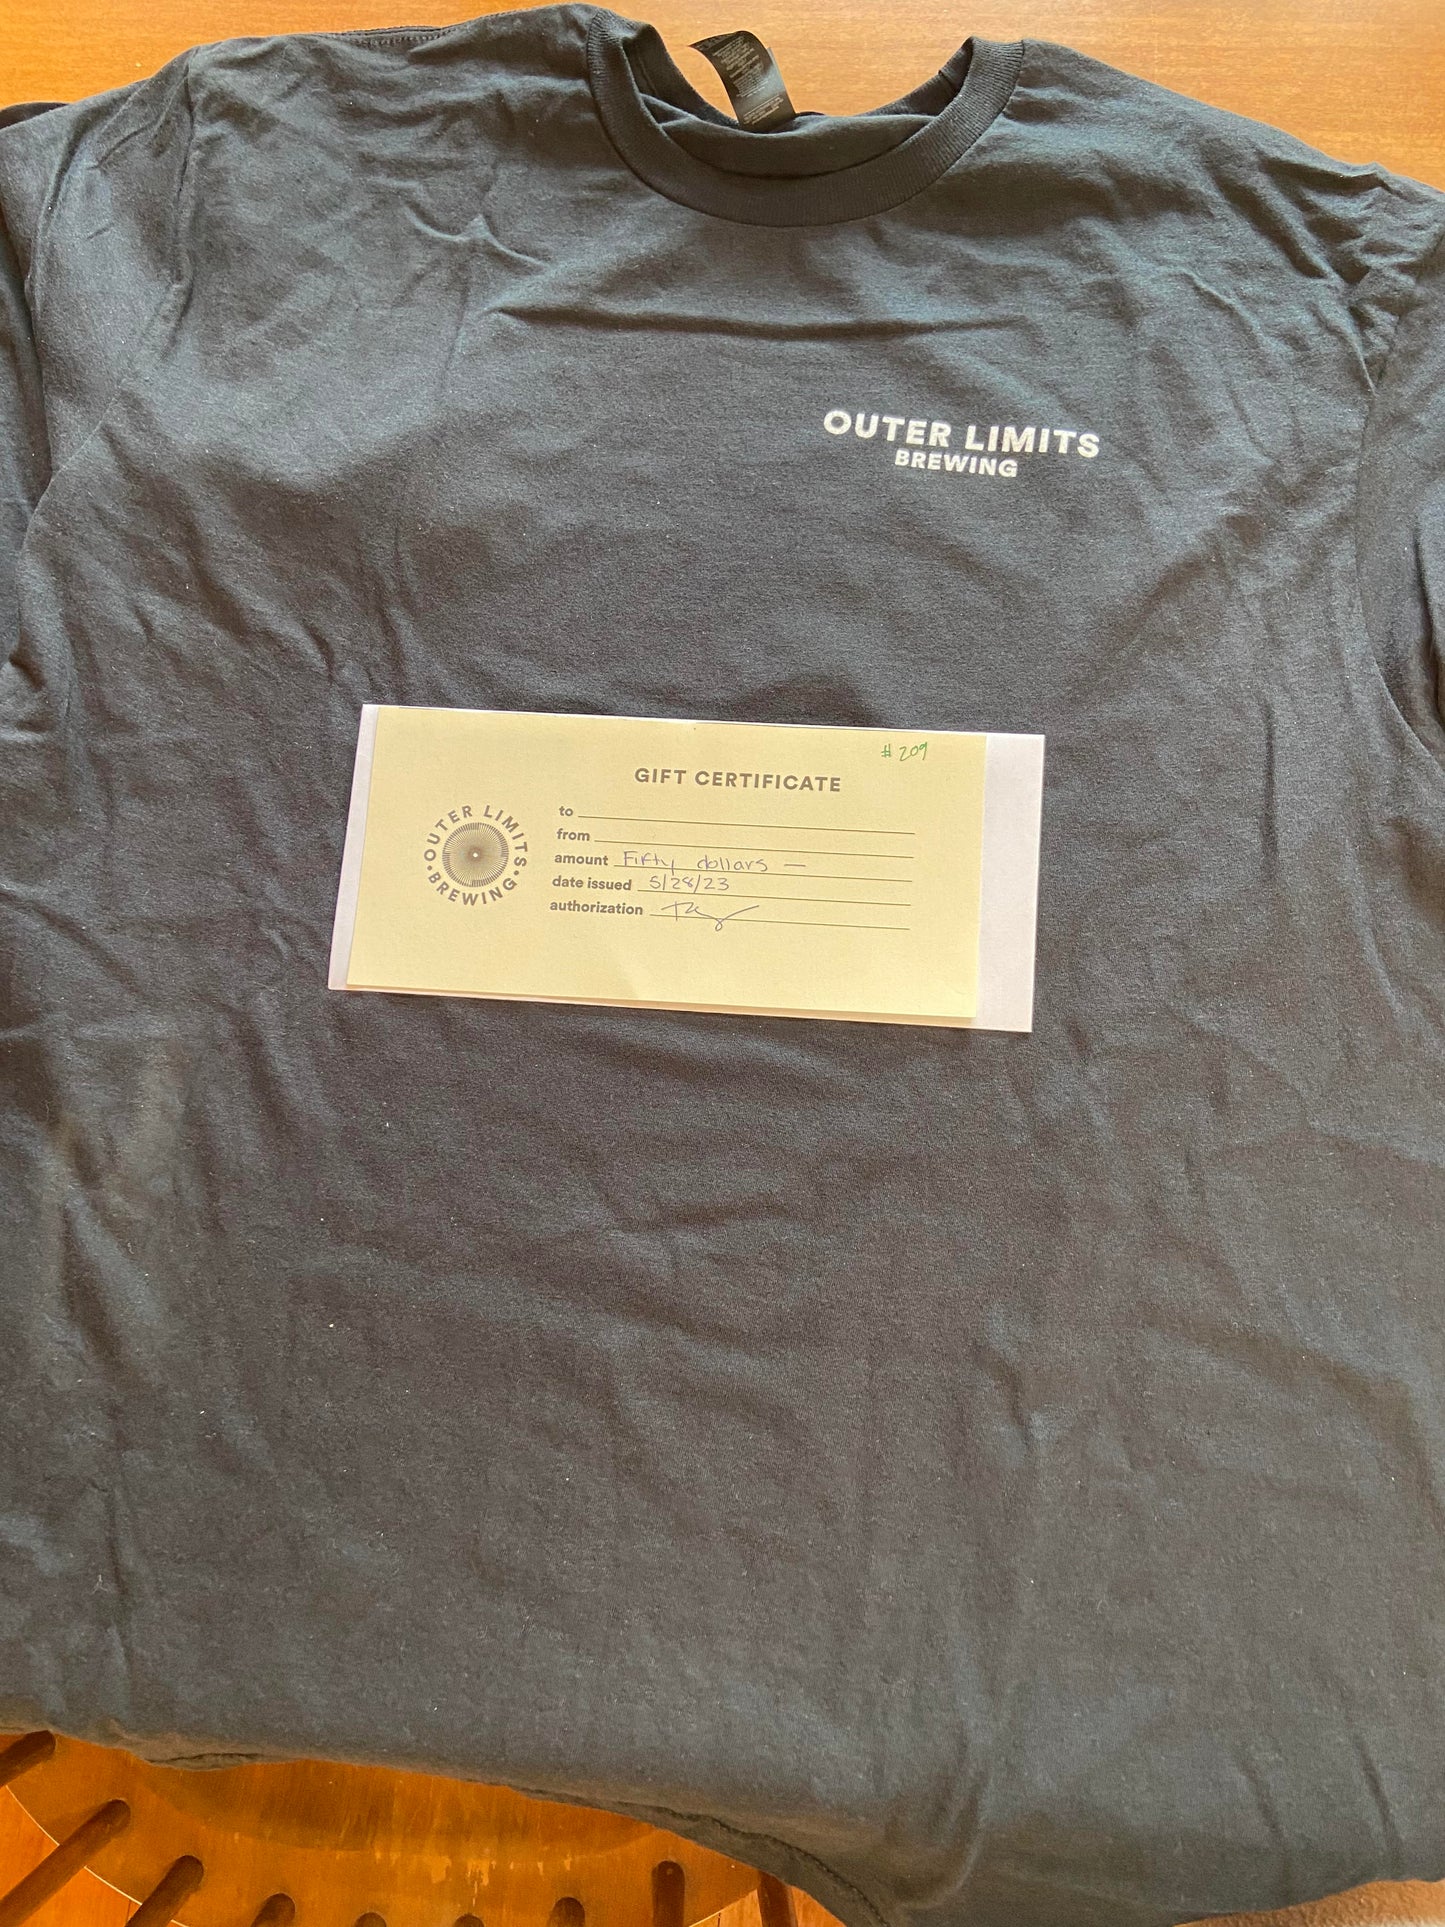 Item #53: Outer Limits Brewing - TShirt & Gift Certificate ($50)